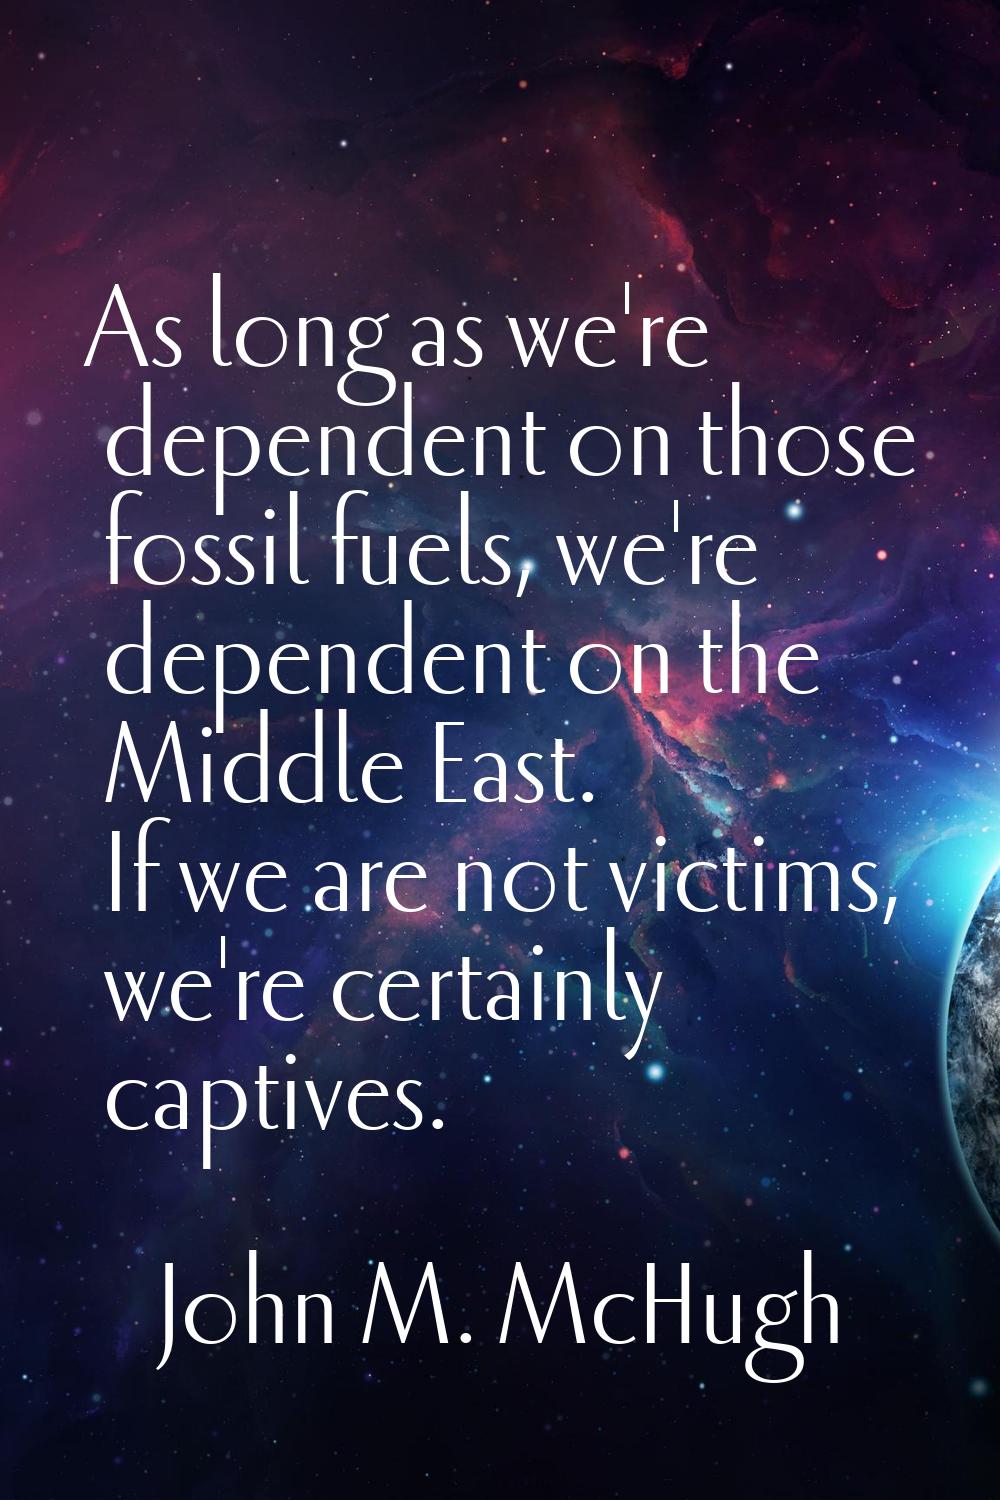 As long as we're dependent on those fossil fuels, we're dependent on the Middle East. If we are not